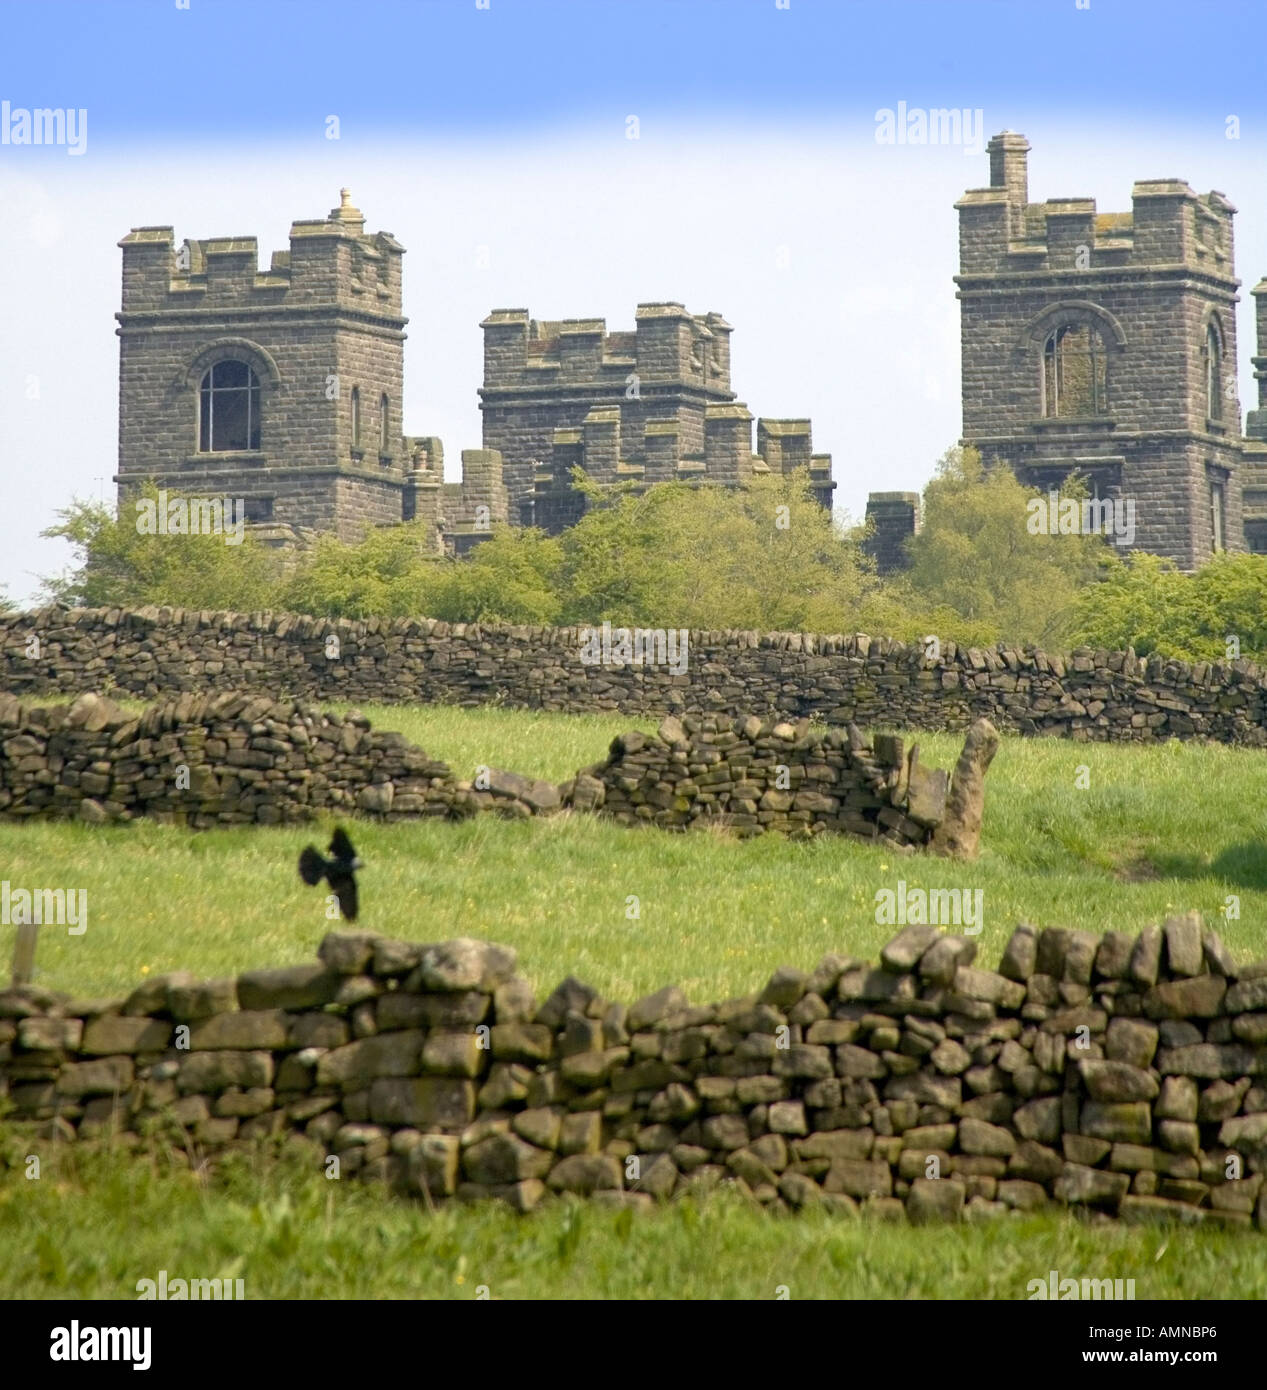 Matlock castle hires stock photography and images Alamy